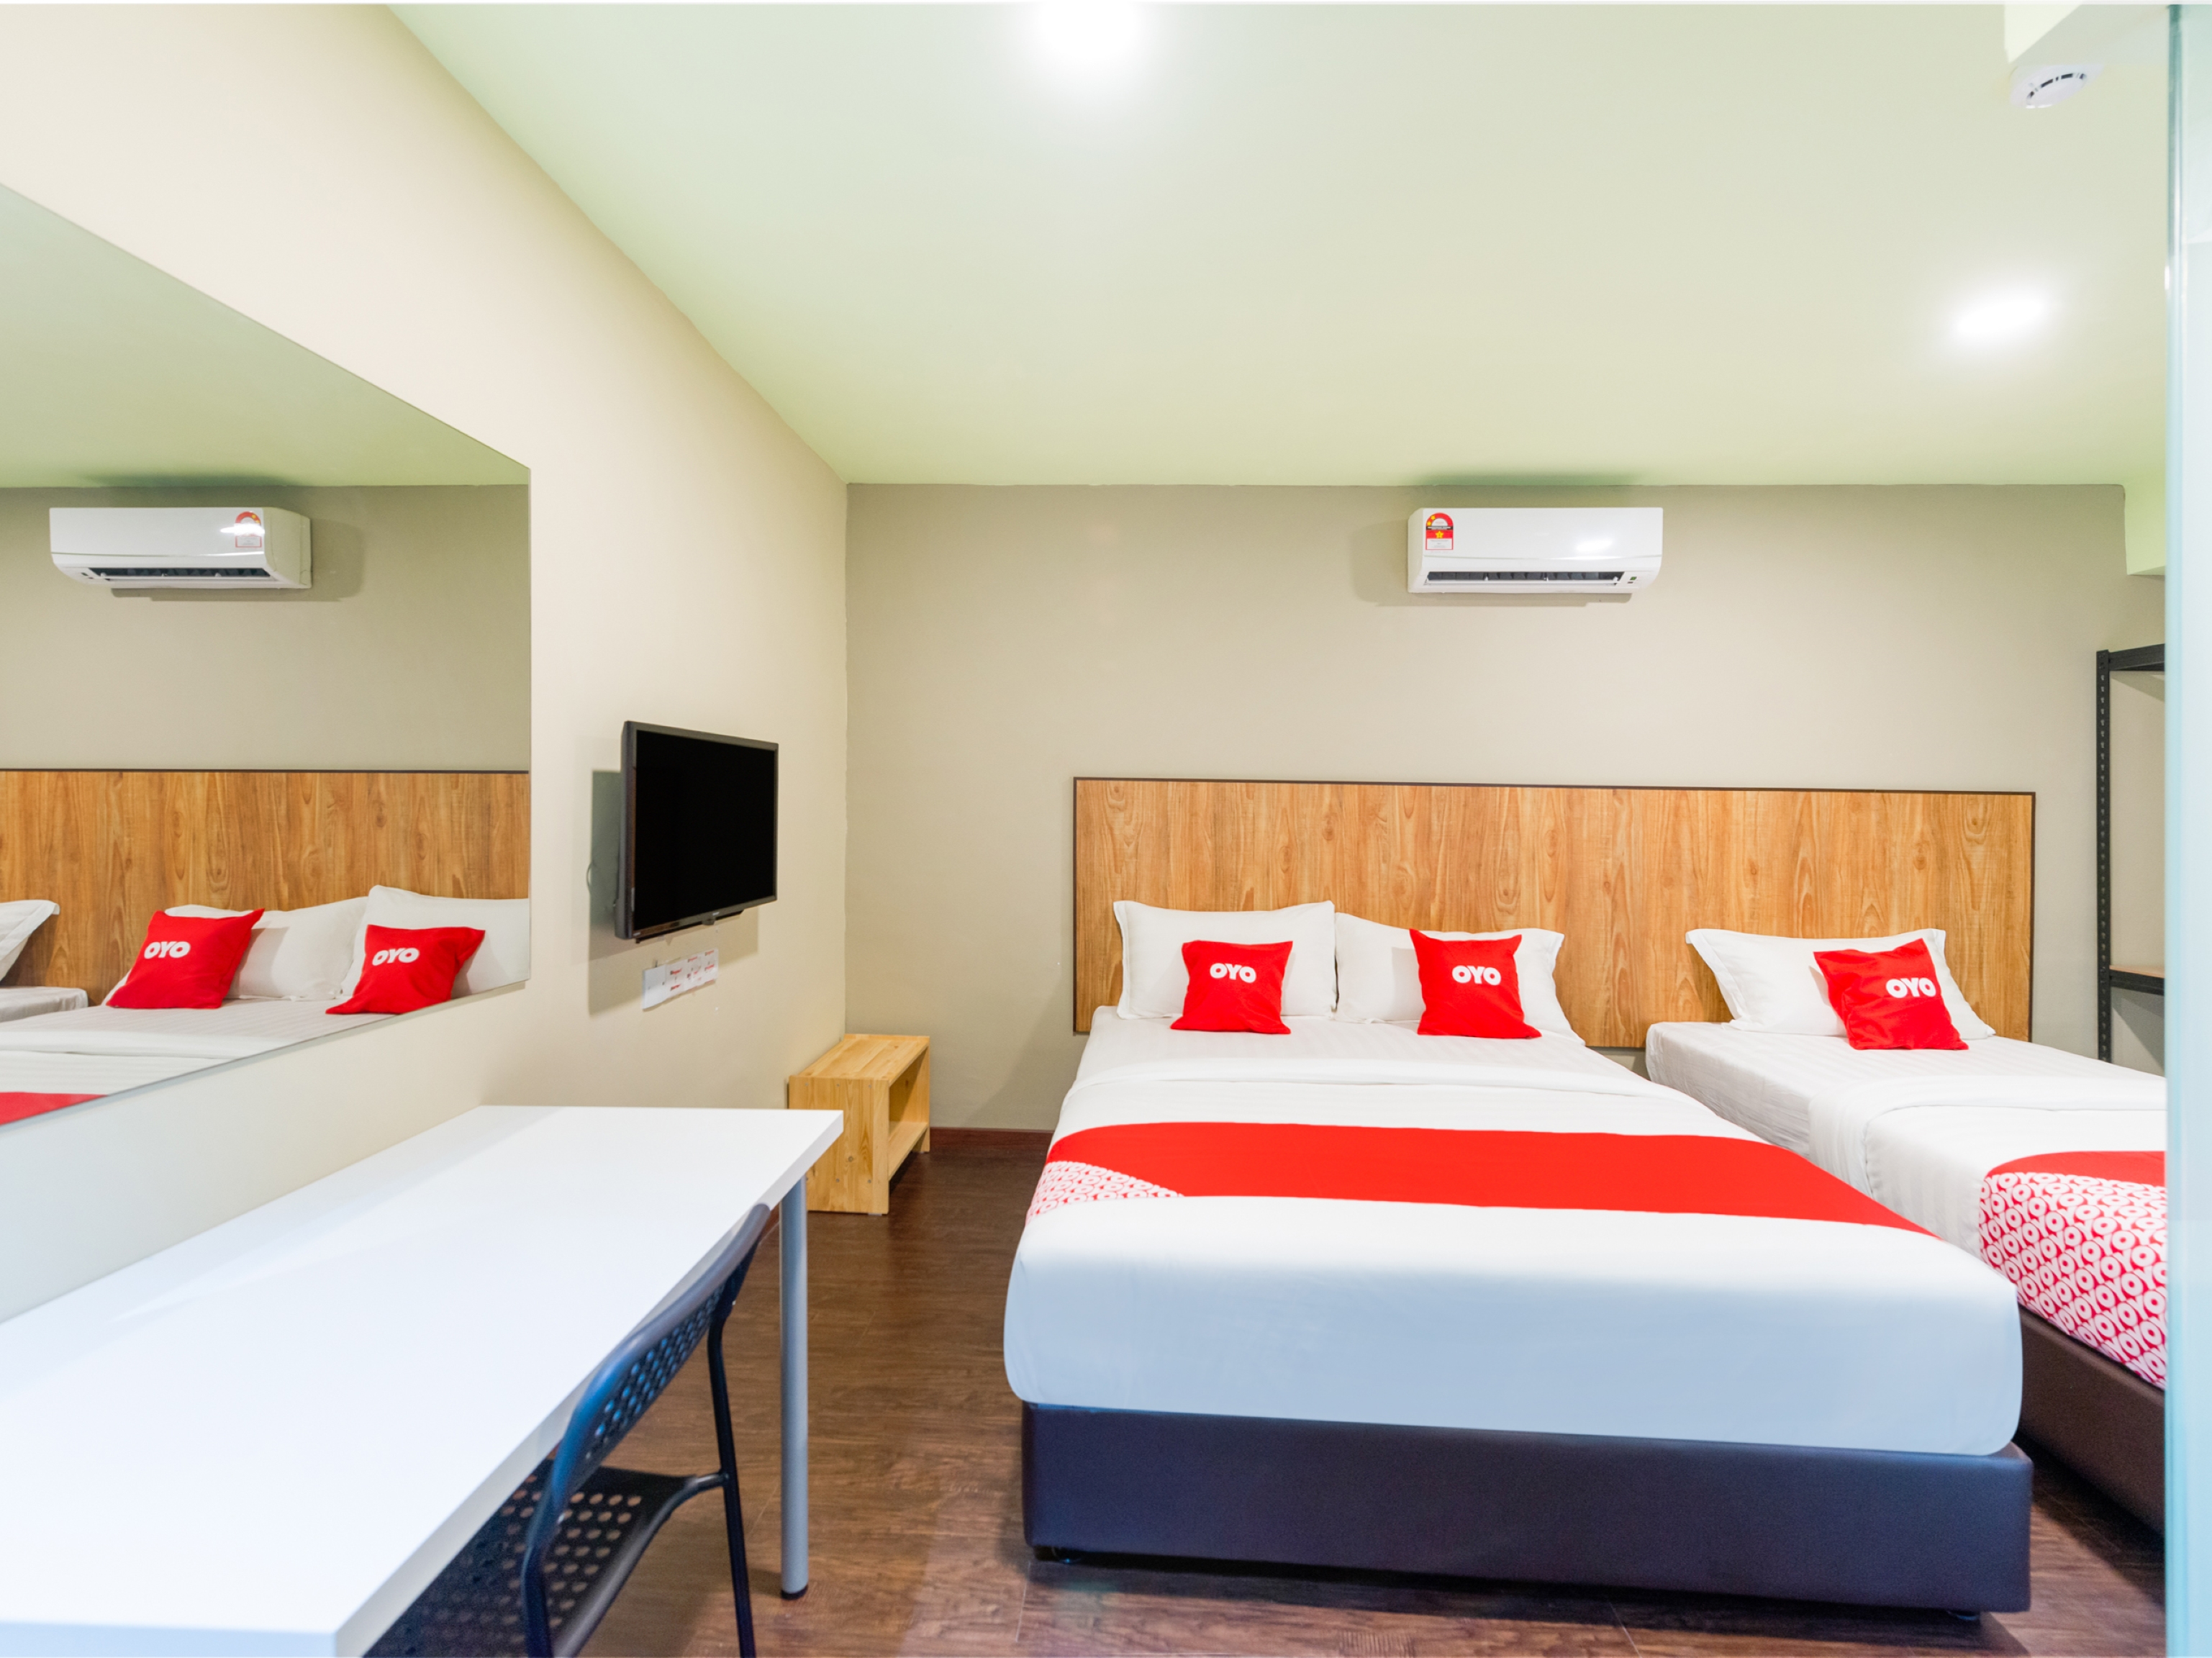 Cool Hotel by OYO Rooms